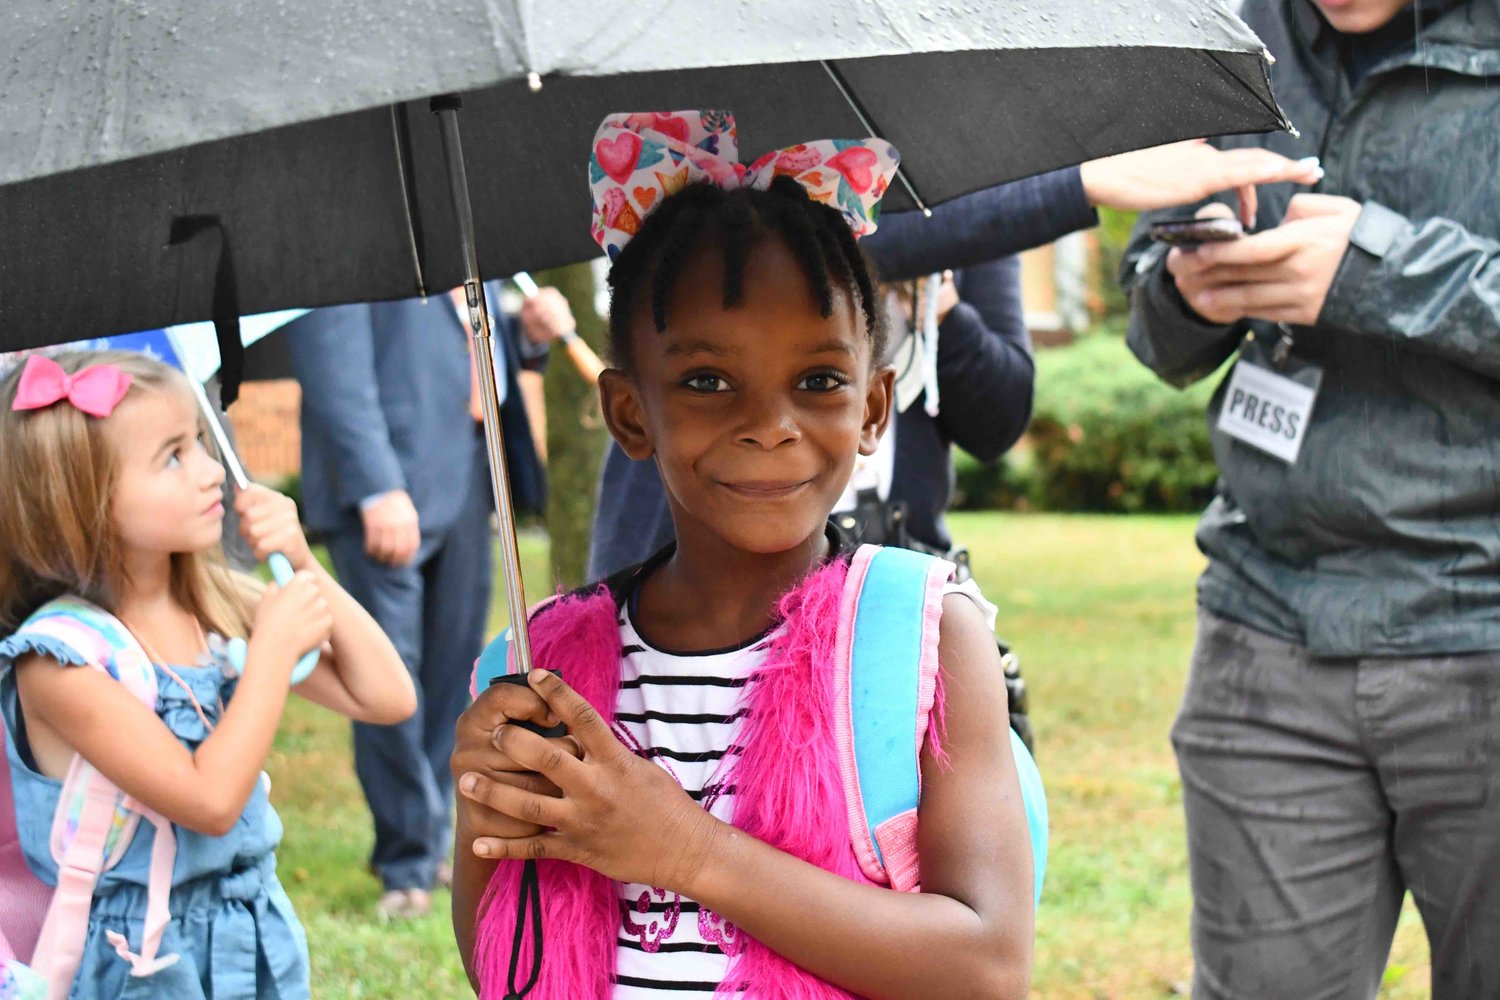 Five-year-old Moana, who will be staring Kindergarten, stood outside Maurice W. Downing School in Malverne as students filtered in for their first day of school.